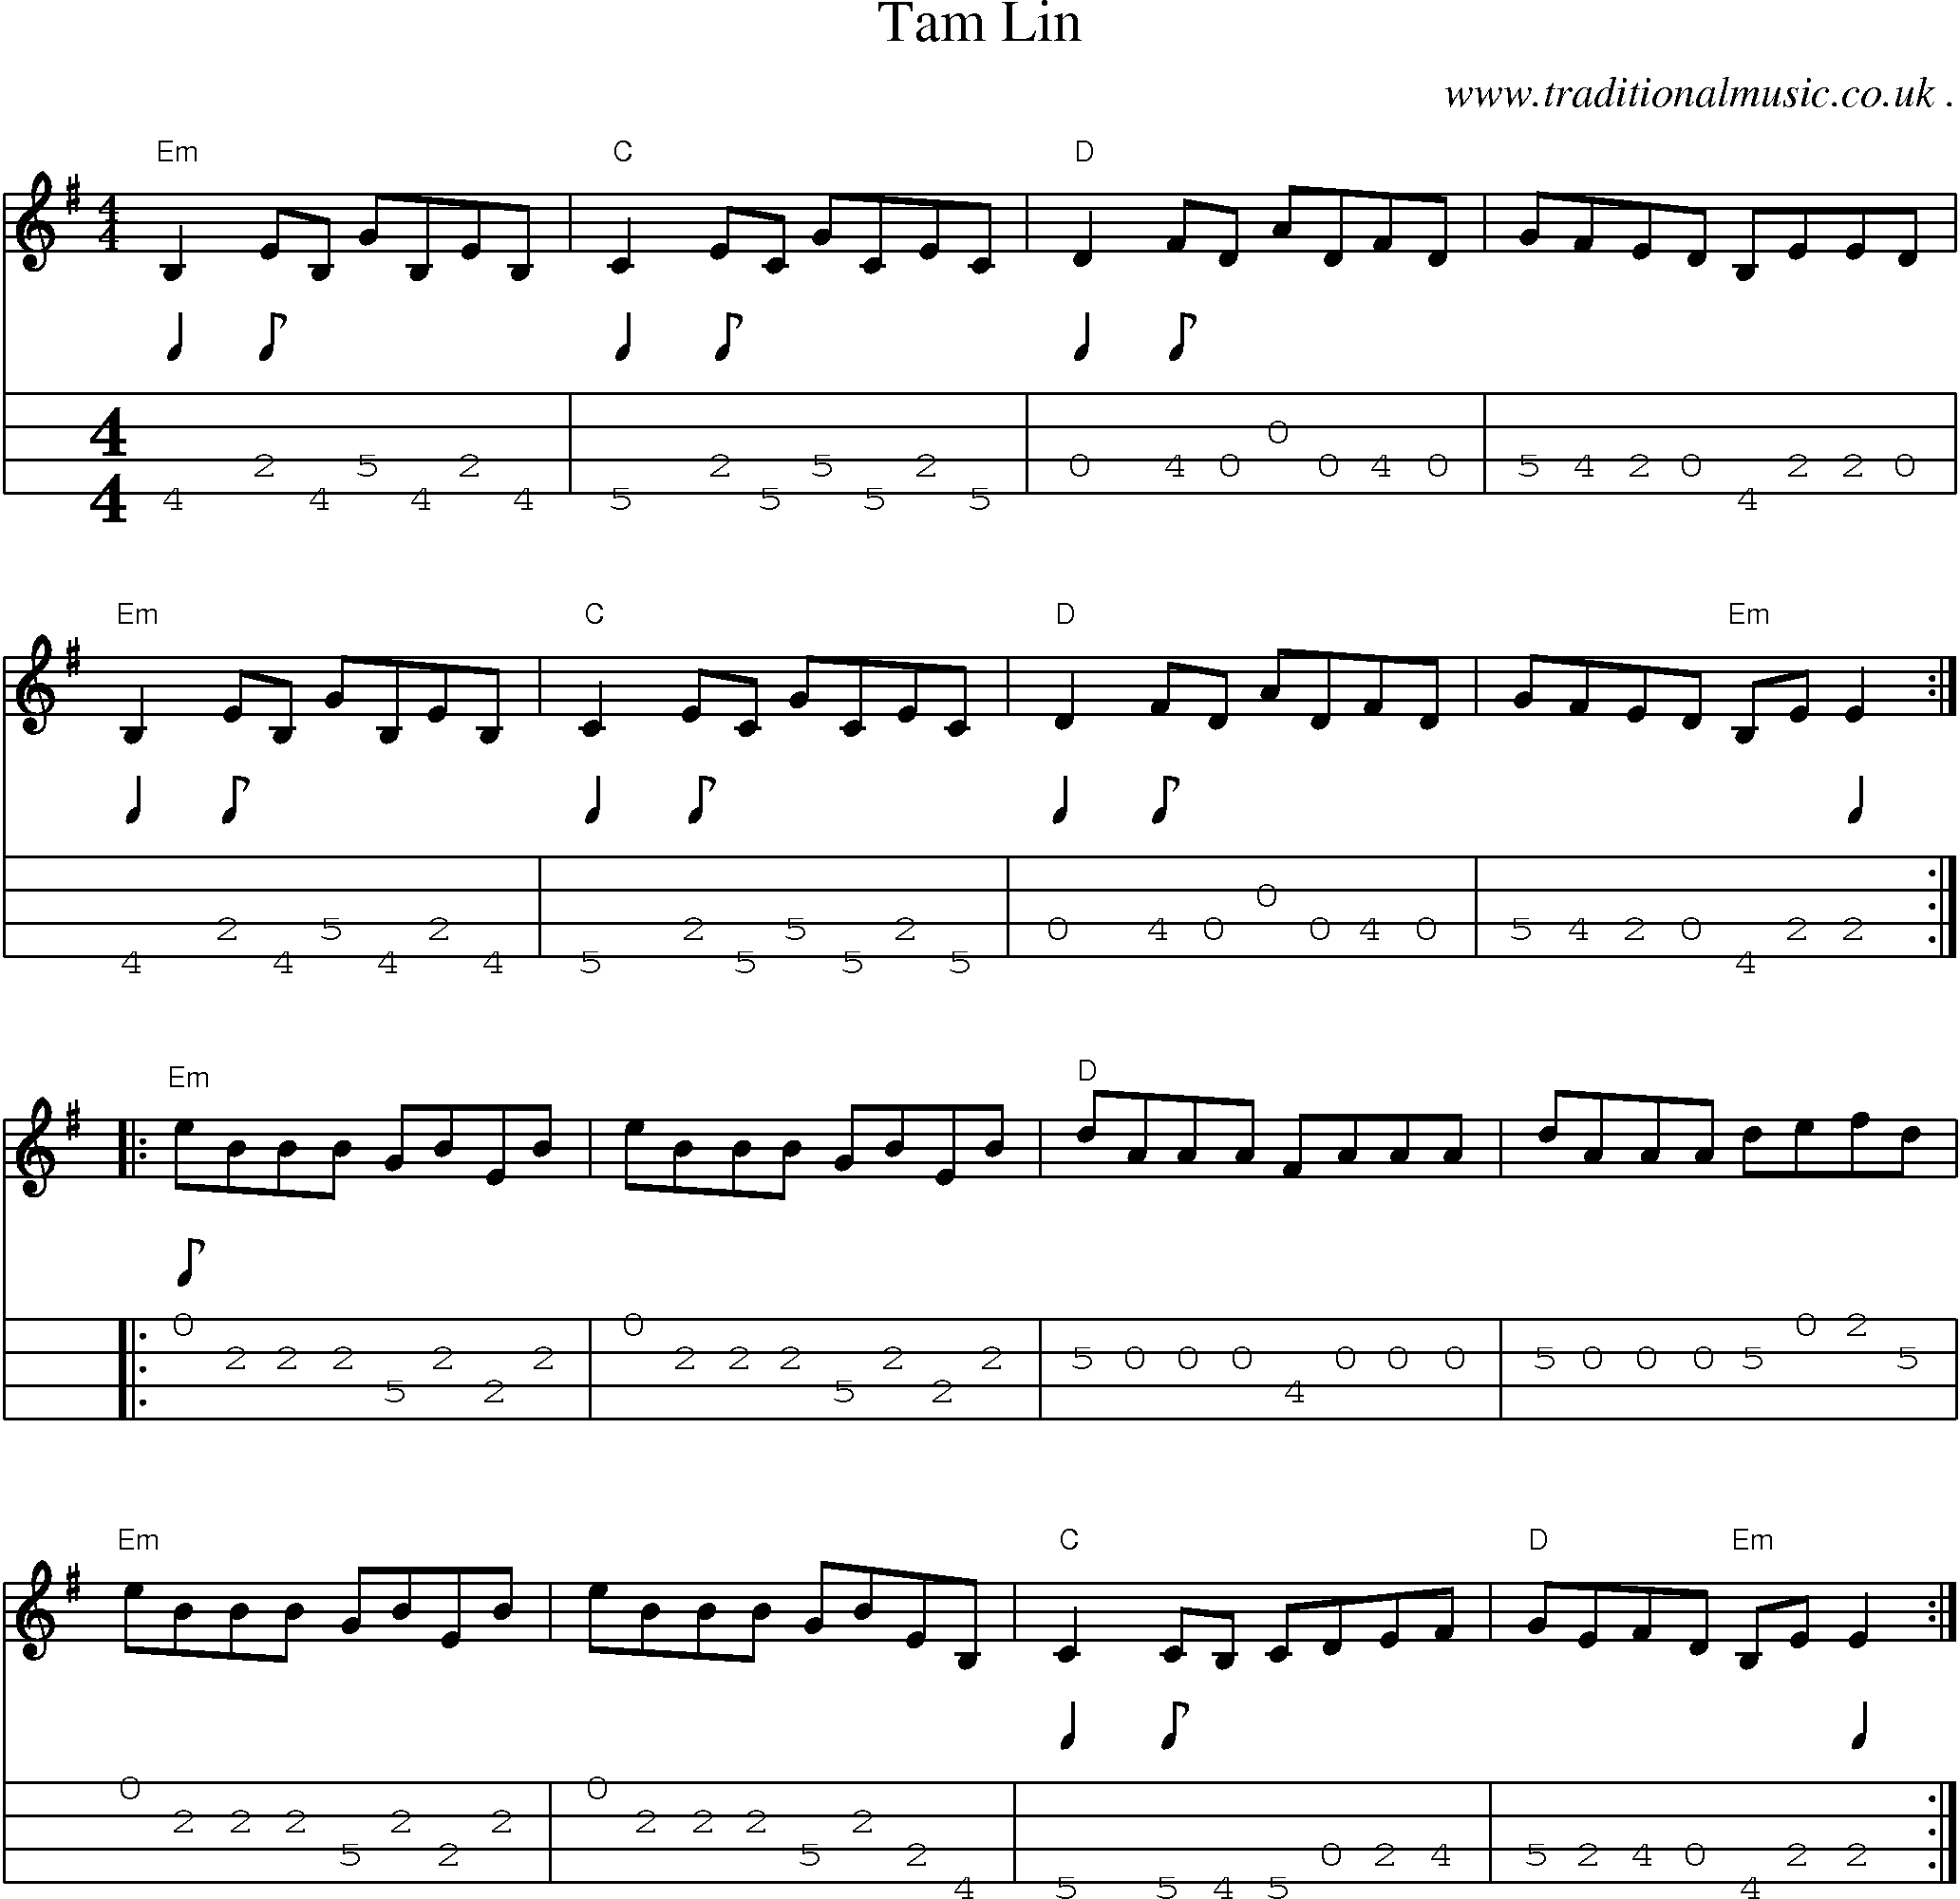 Music Score and Guitar Tabs for Tam Lin